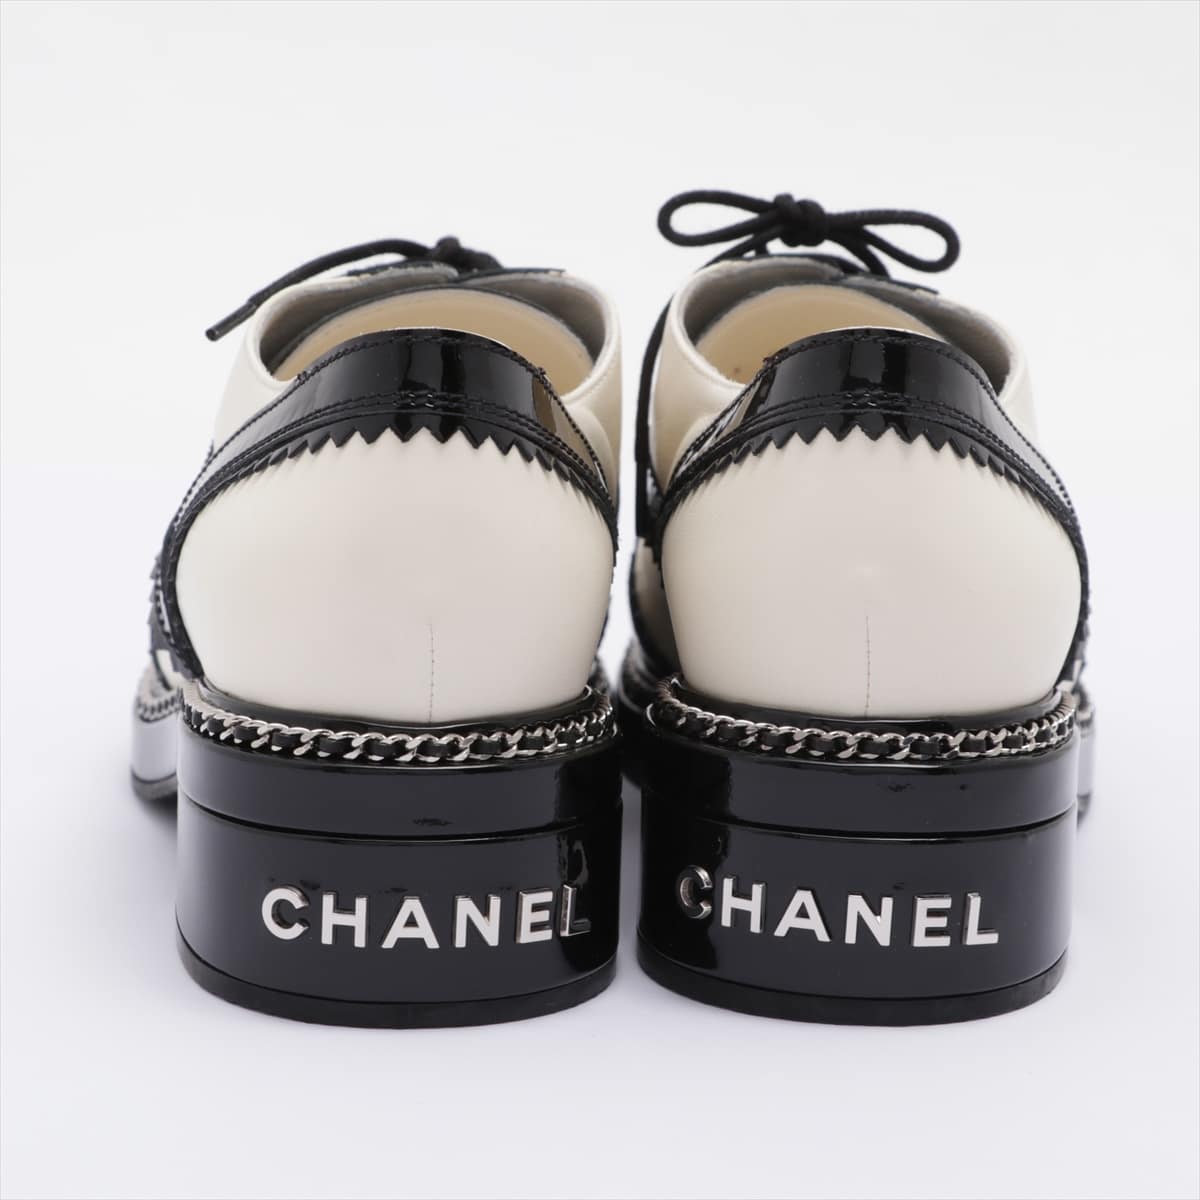 Chanel Leather & patent Dress shoes 38 Ladies' Black × White G35316 wingtip